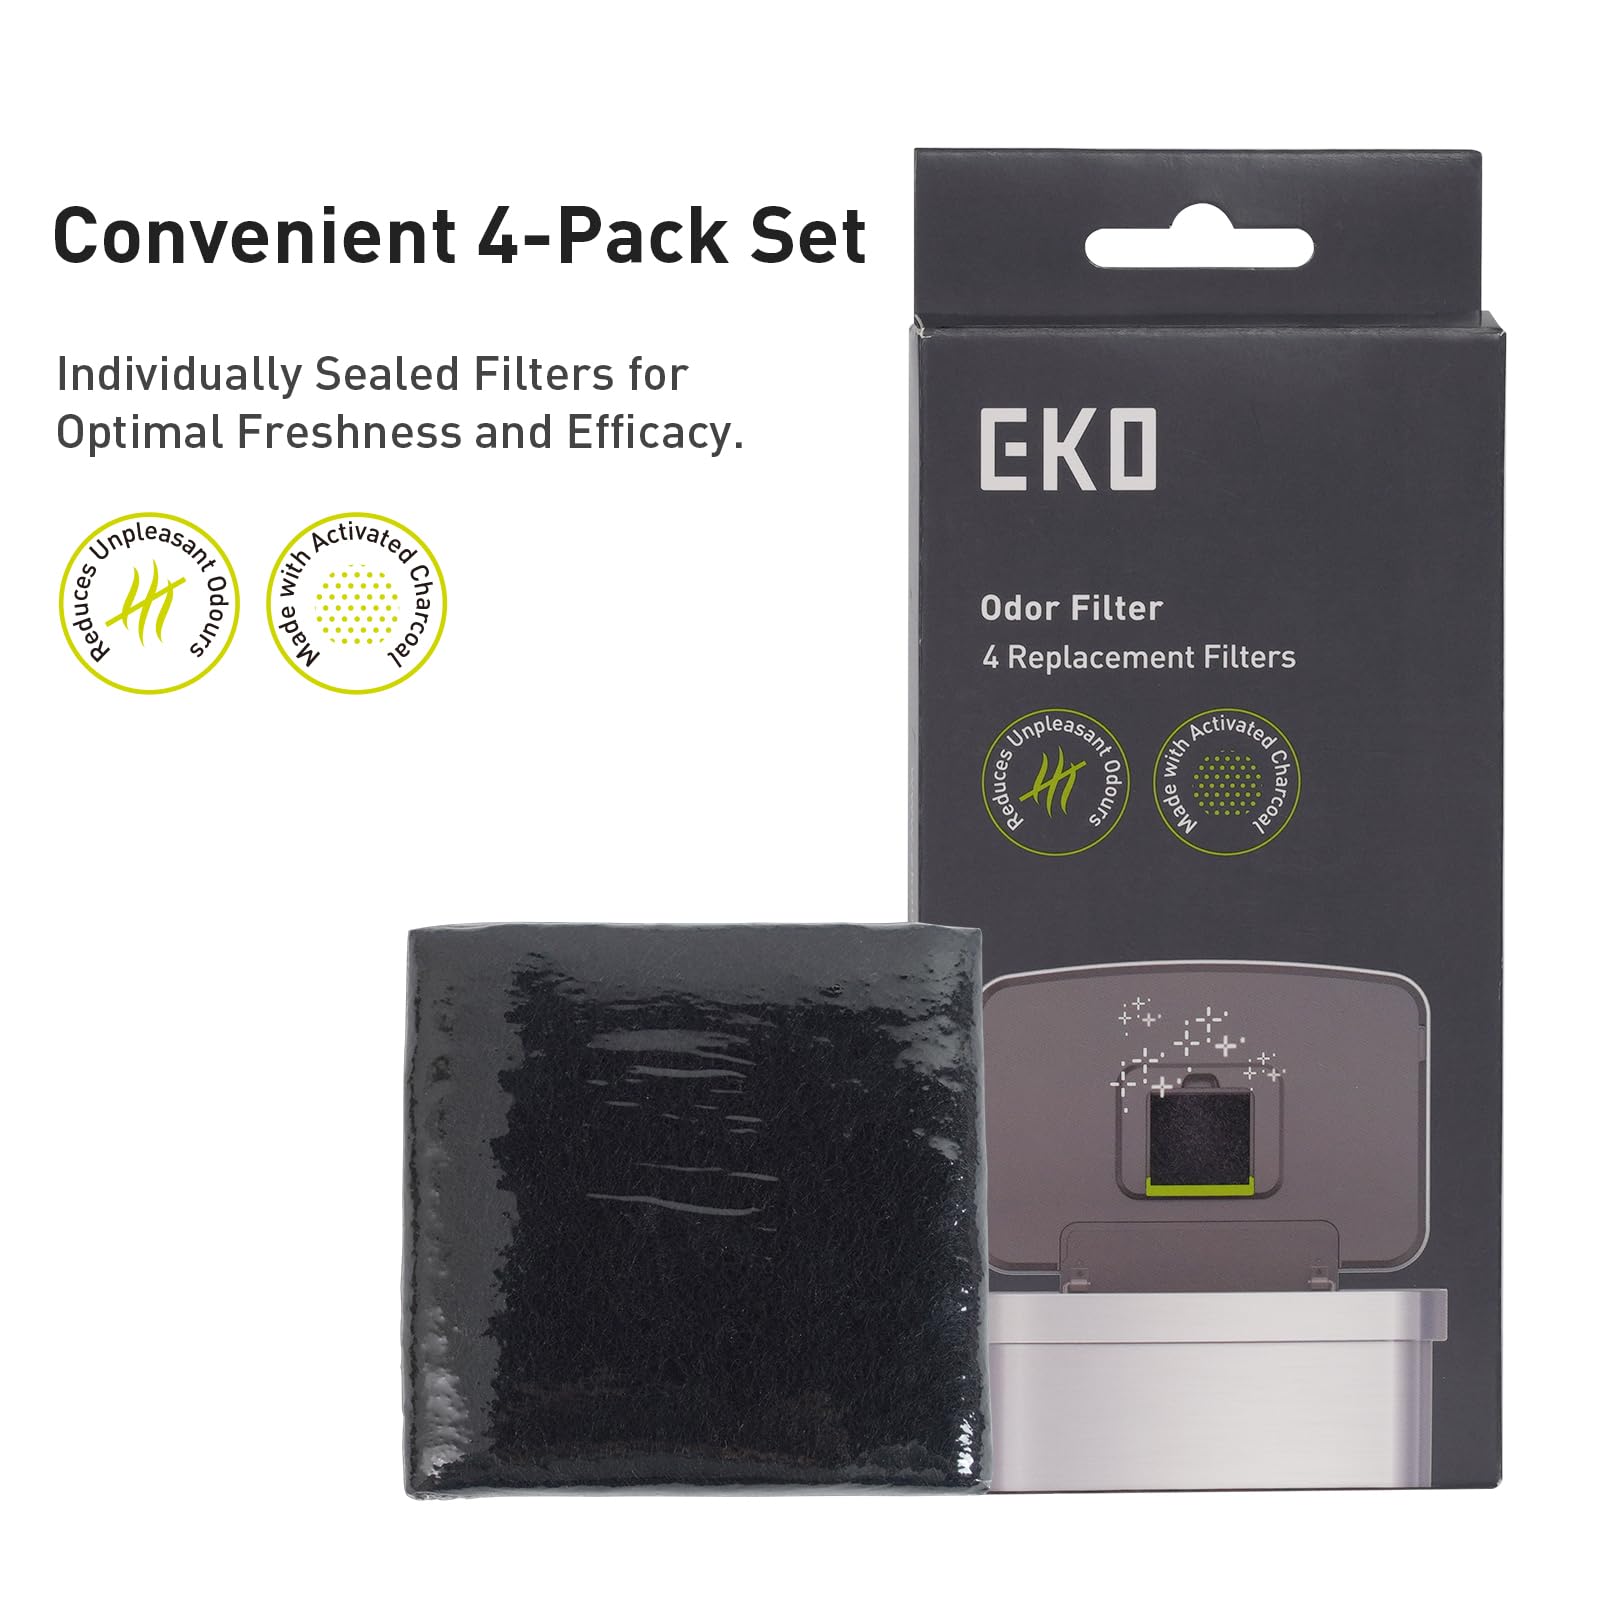 EKO Odor Filter Refills for Trash Can and Compost Bin, Activated Charcoal Deodorizer, Strong Charcoal Odor Absorber, Pack of 4 Replacements